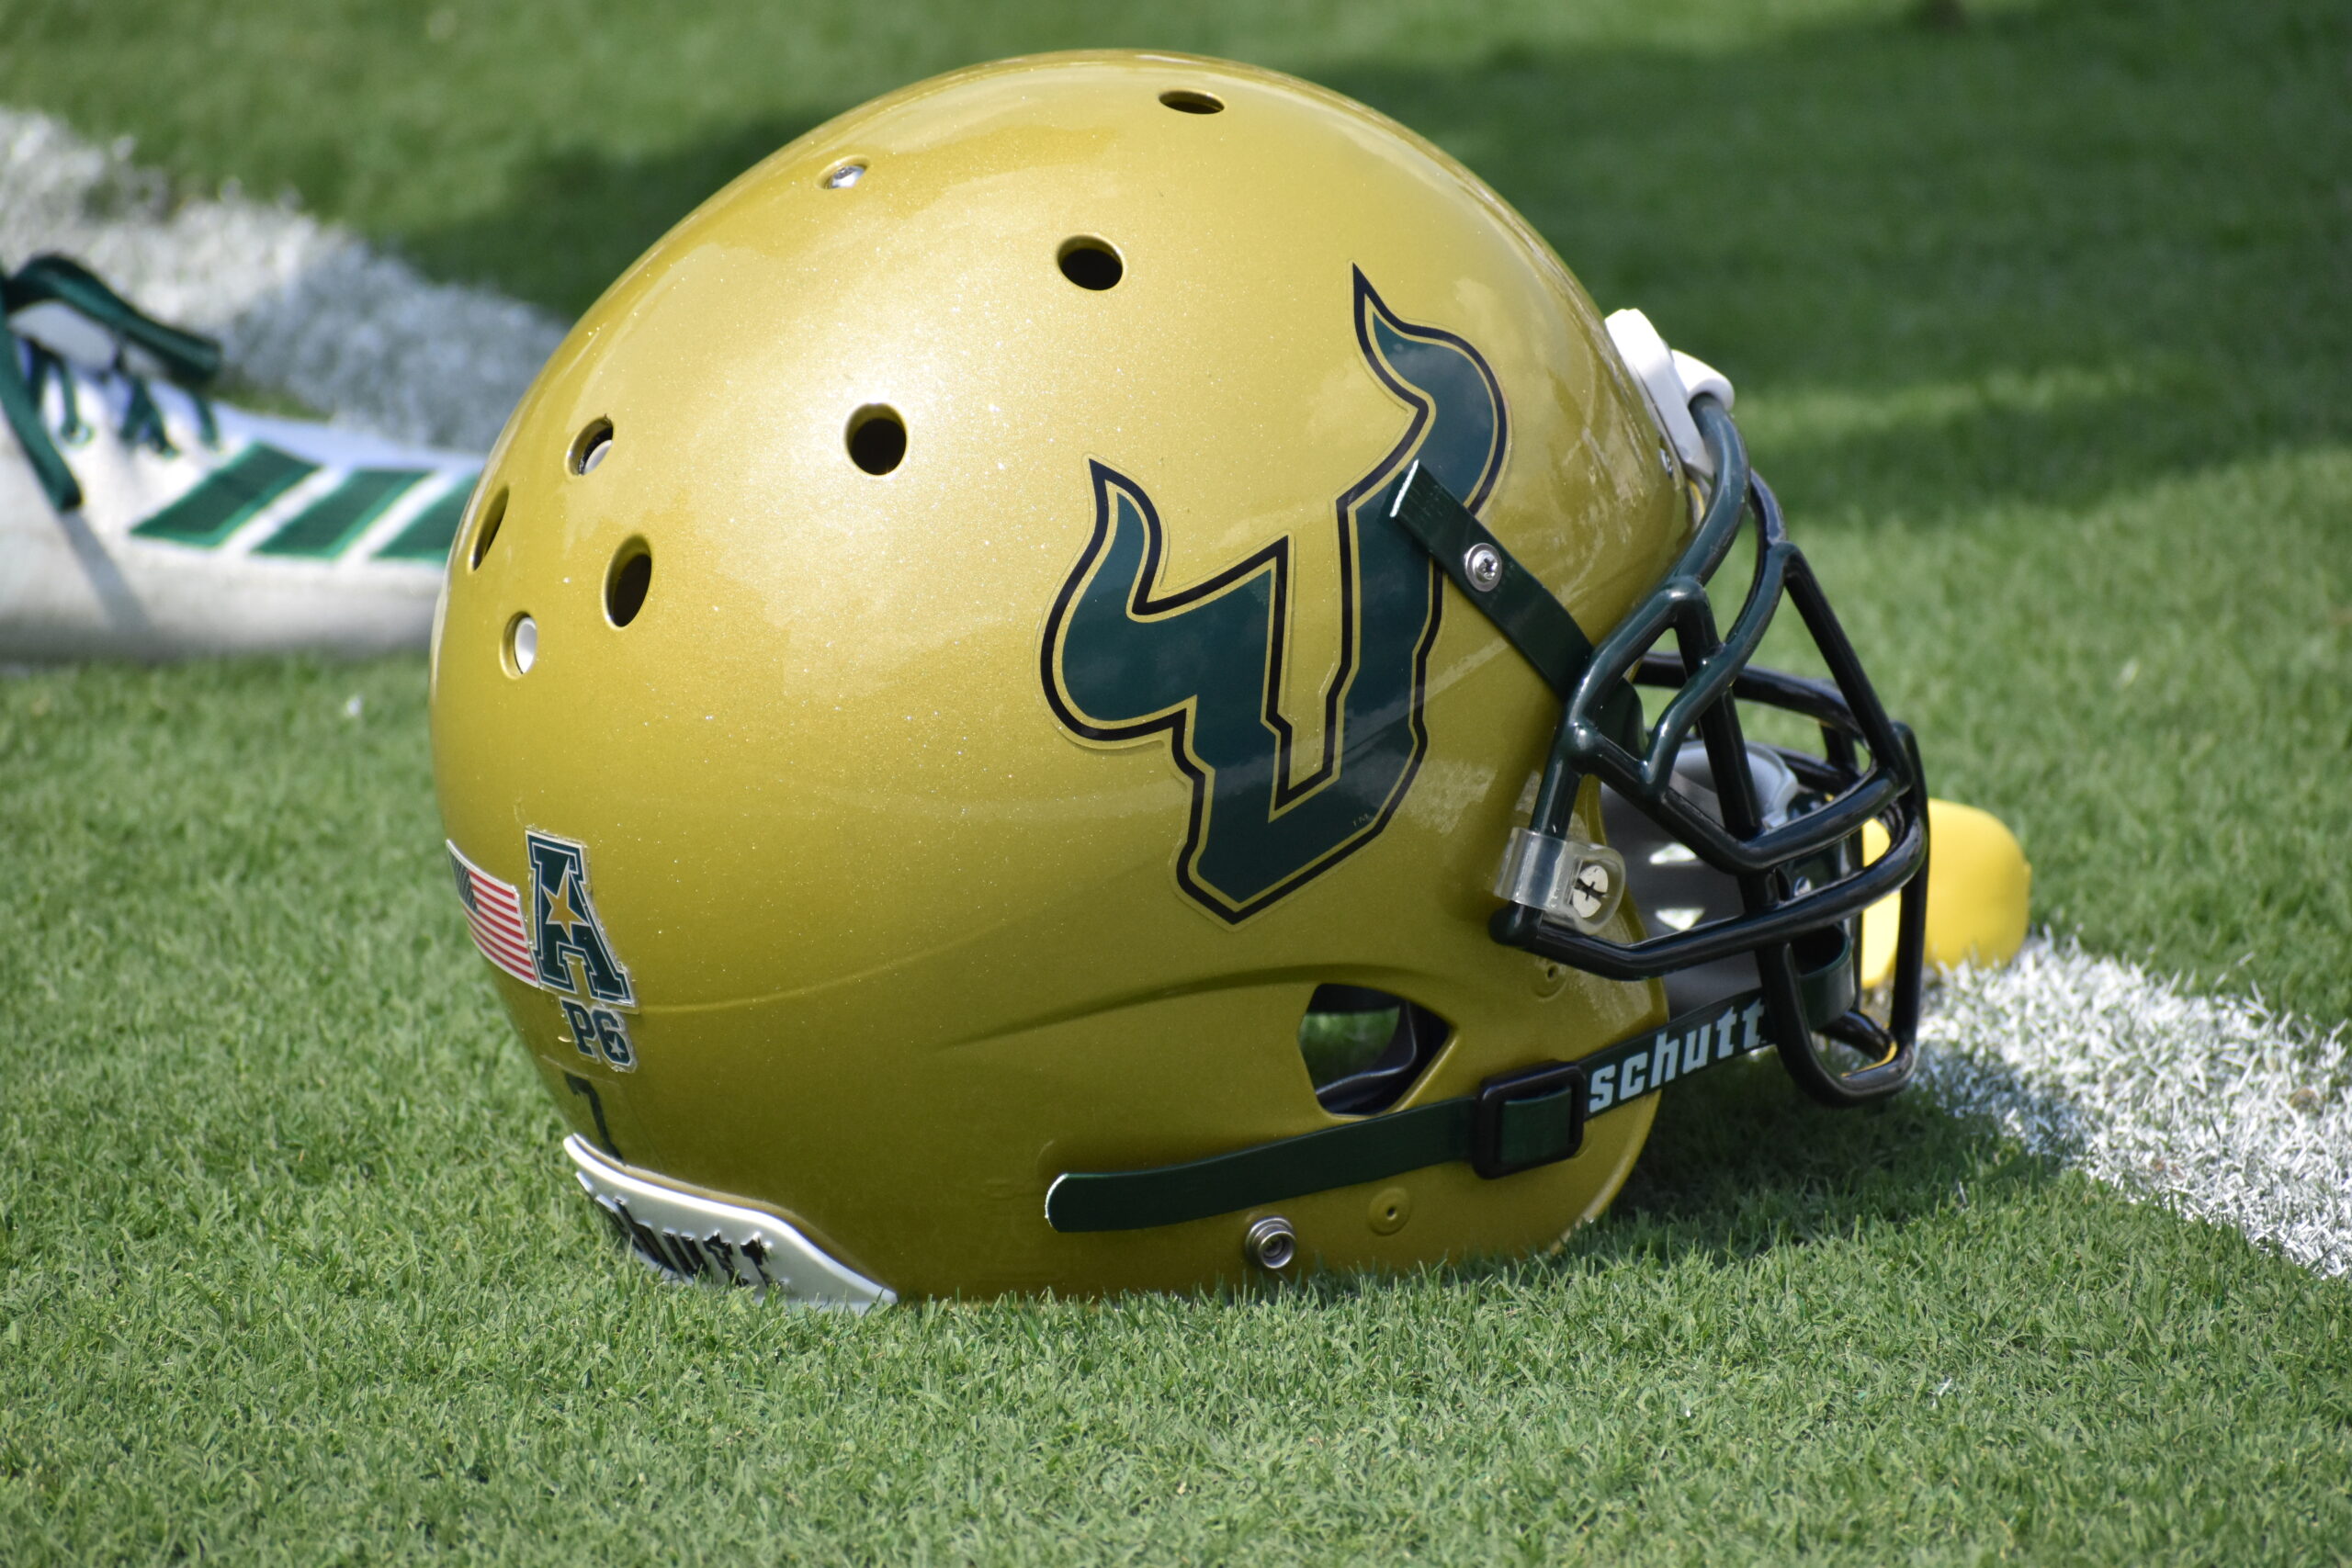 USF to play Notre Dame, report says